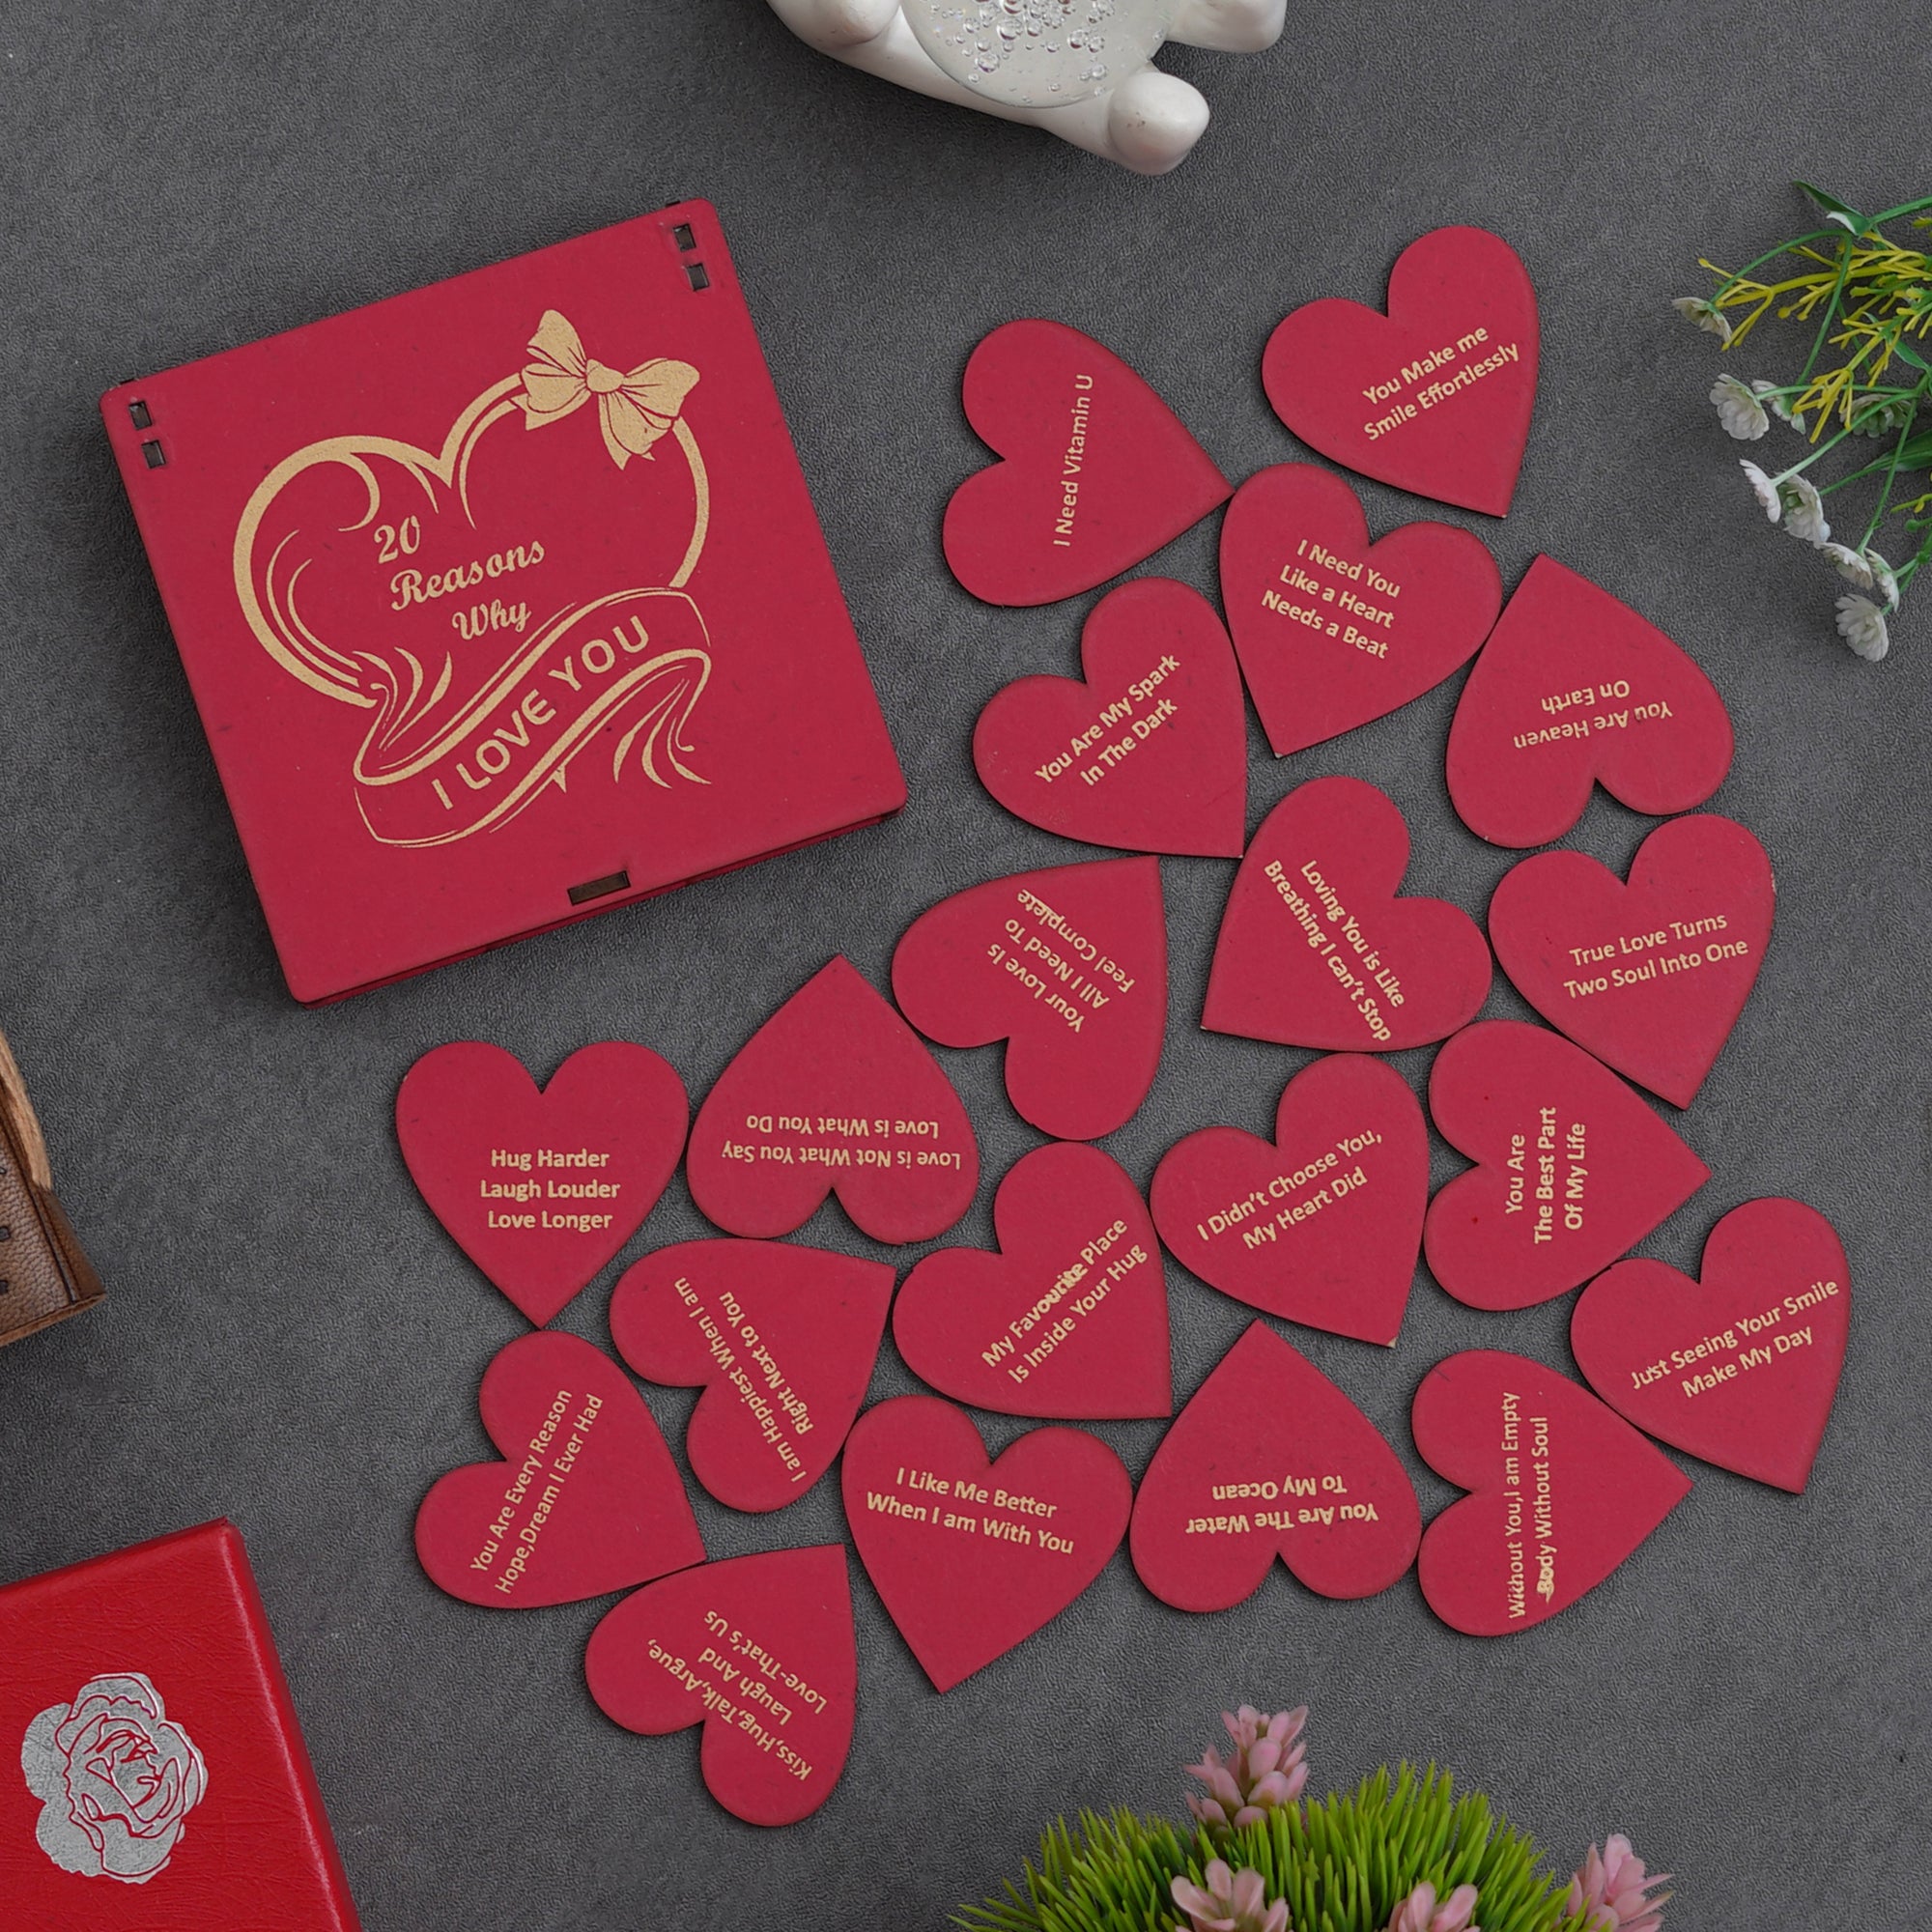 Valentine Combo of Pack of 8 Love Gift Cards, "20 Reasons Why I Love You" Printed on Little Red Hearts Decorative Wooden Gift Set Box, Red Roses Bouquet and White, Red Teddy Bear Valentine's Rectangle Shaped Gift Box 3